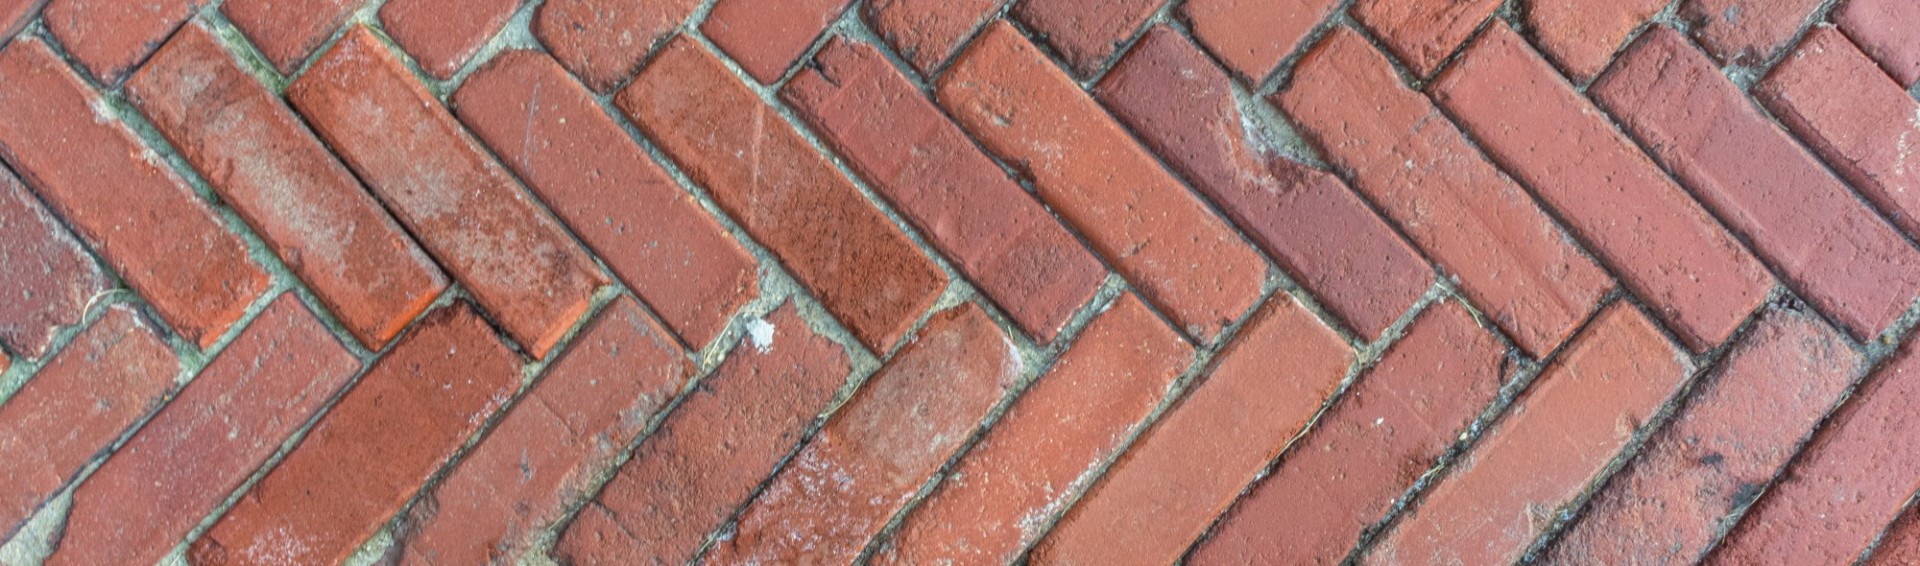 A close-up photo of the brick walkway on Columbia University's College Walk.